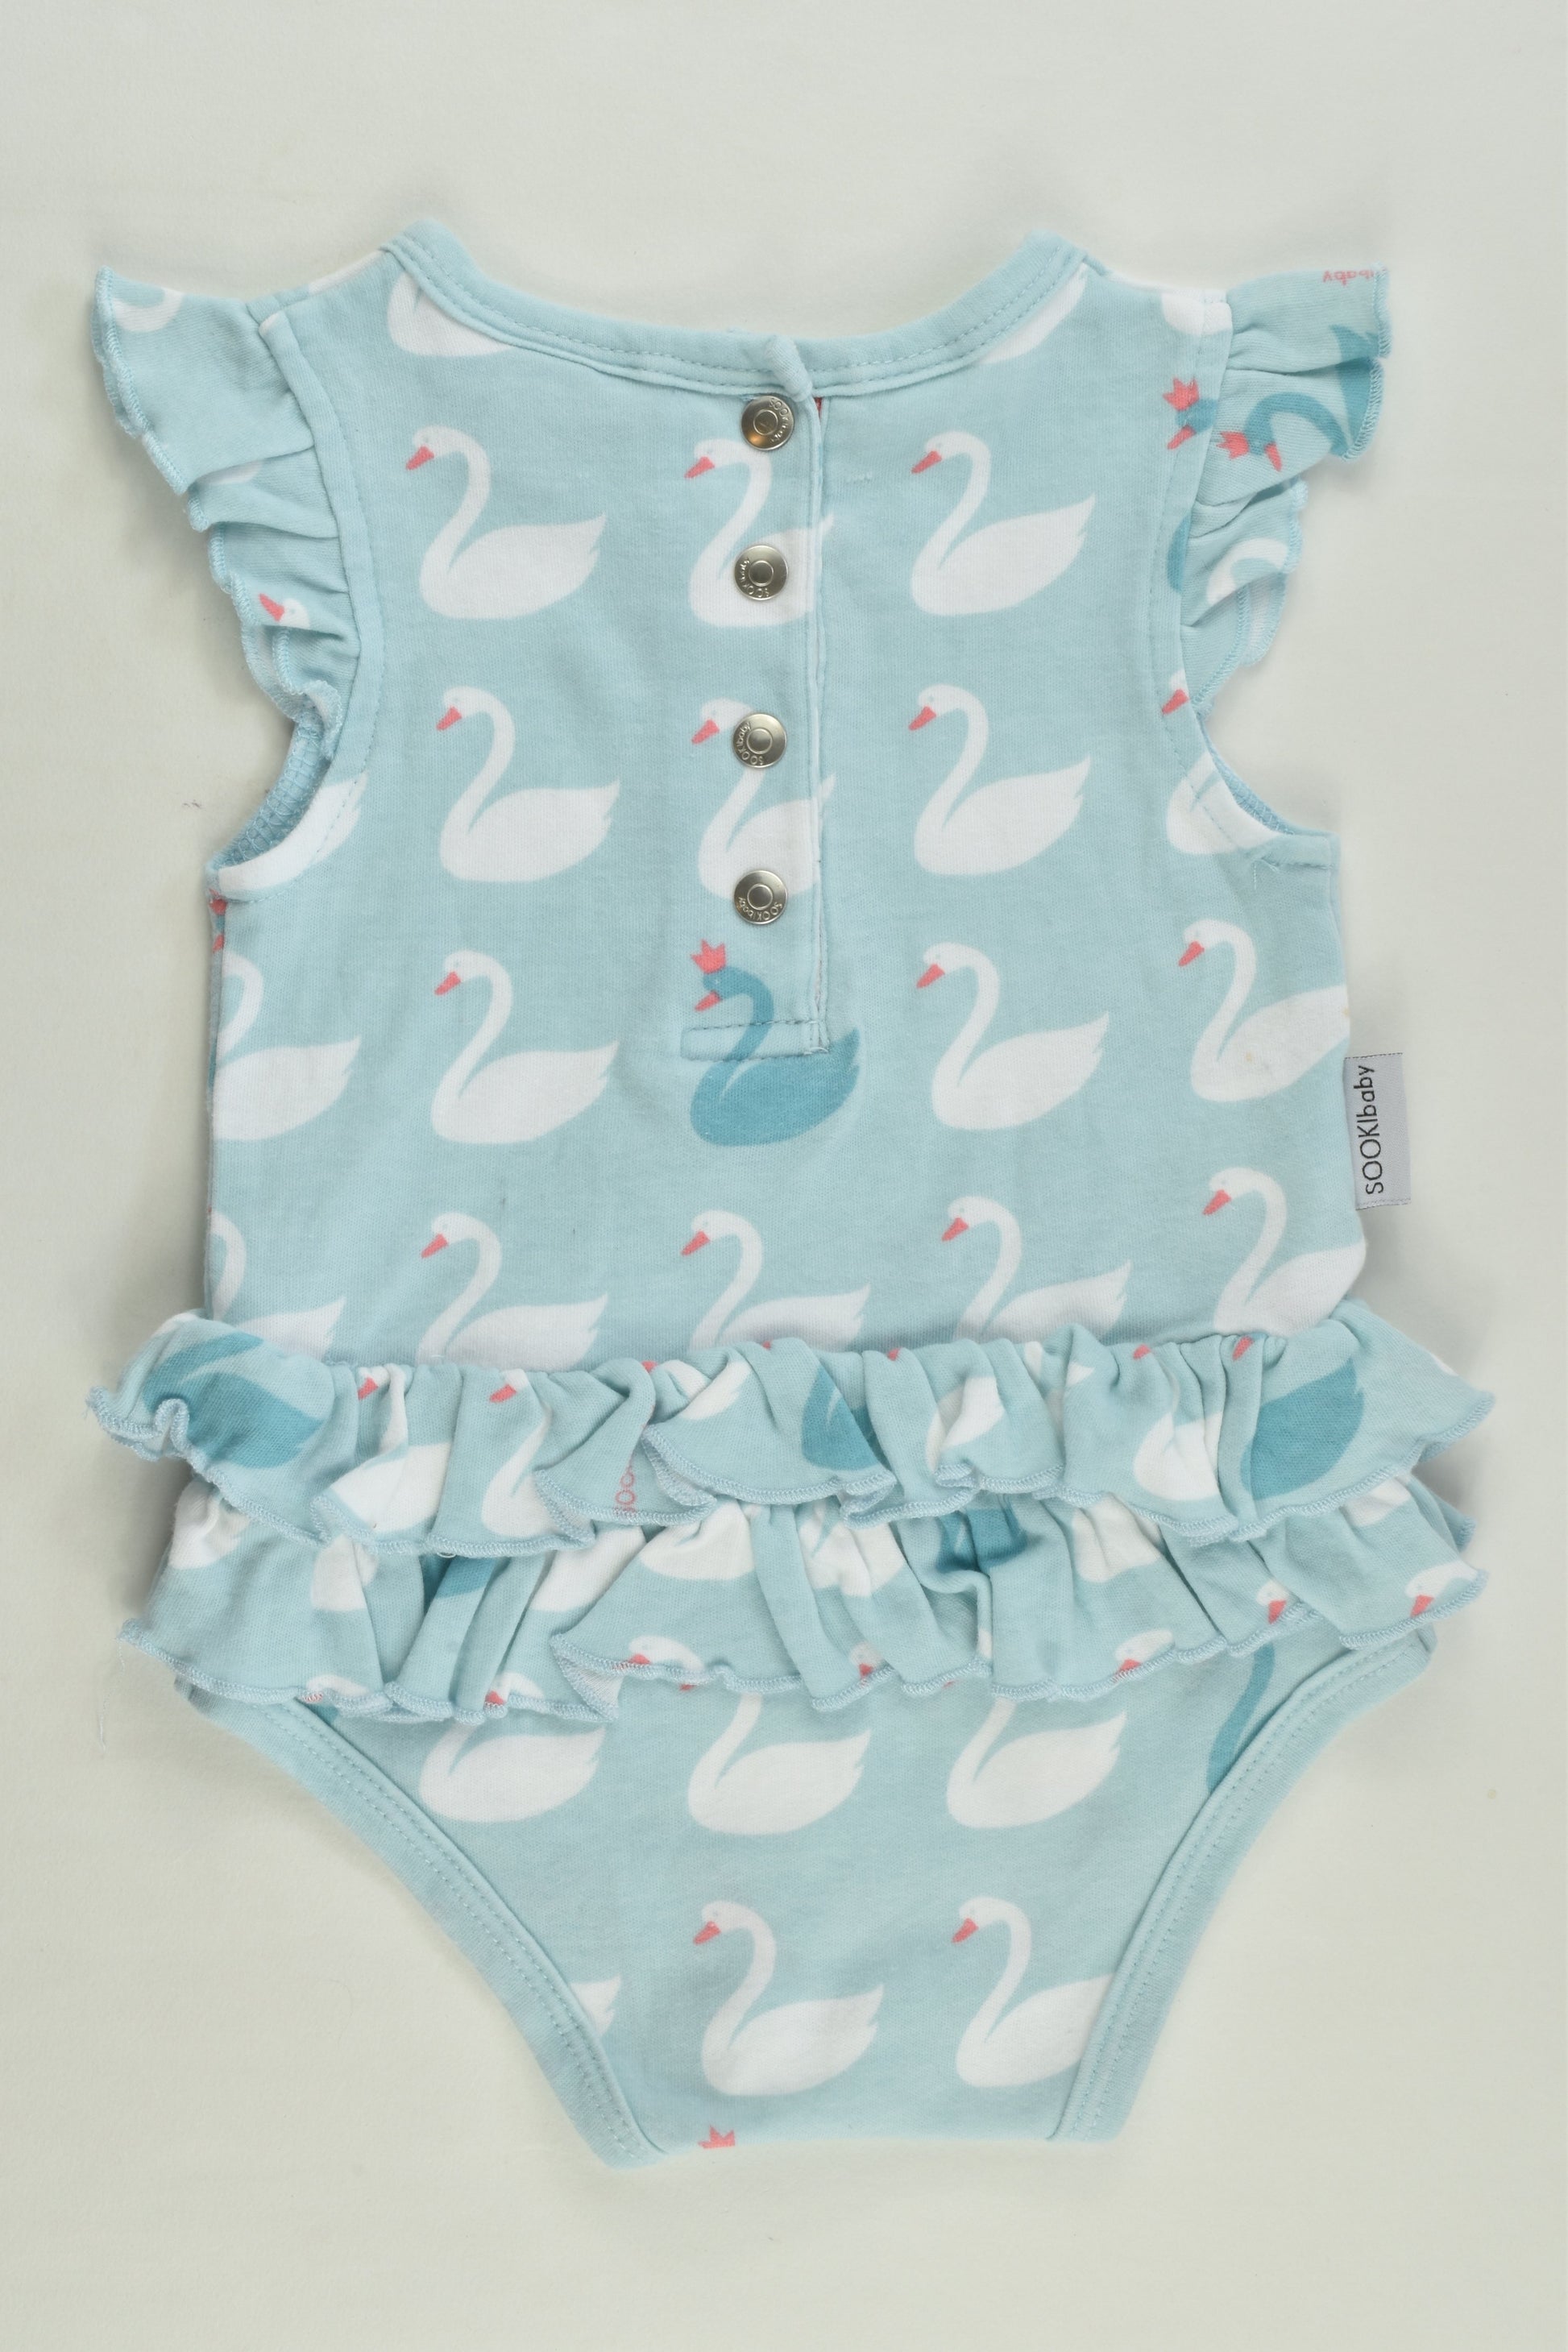 SOOKIbaby by Diana Dotur Size 00 (6 months) Swan Ruffle Bodysuit